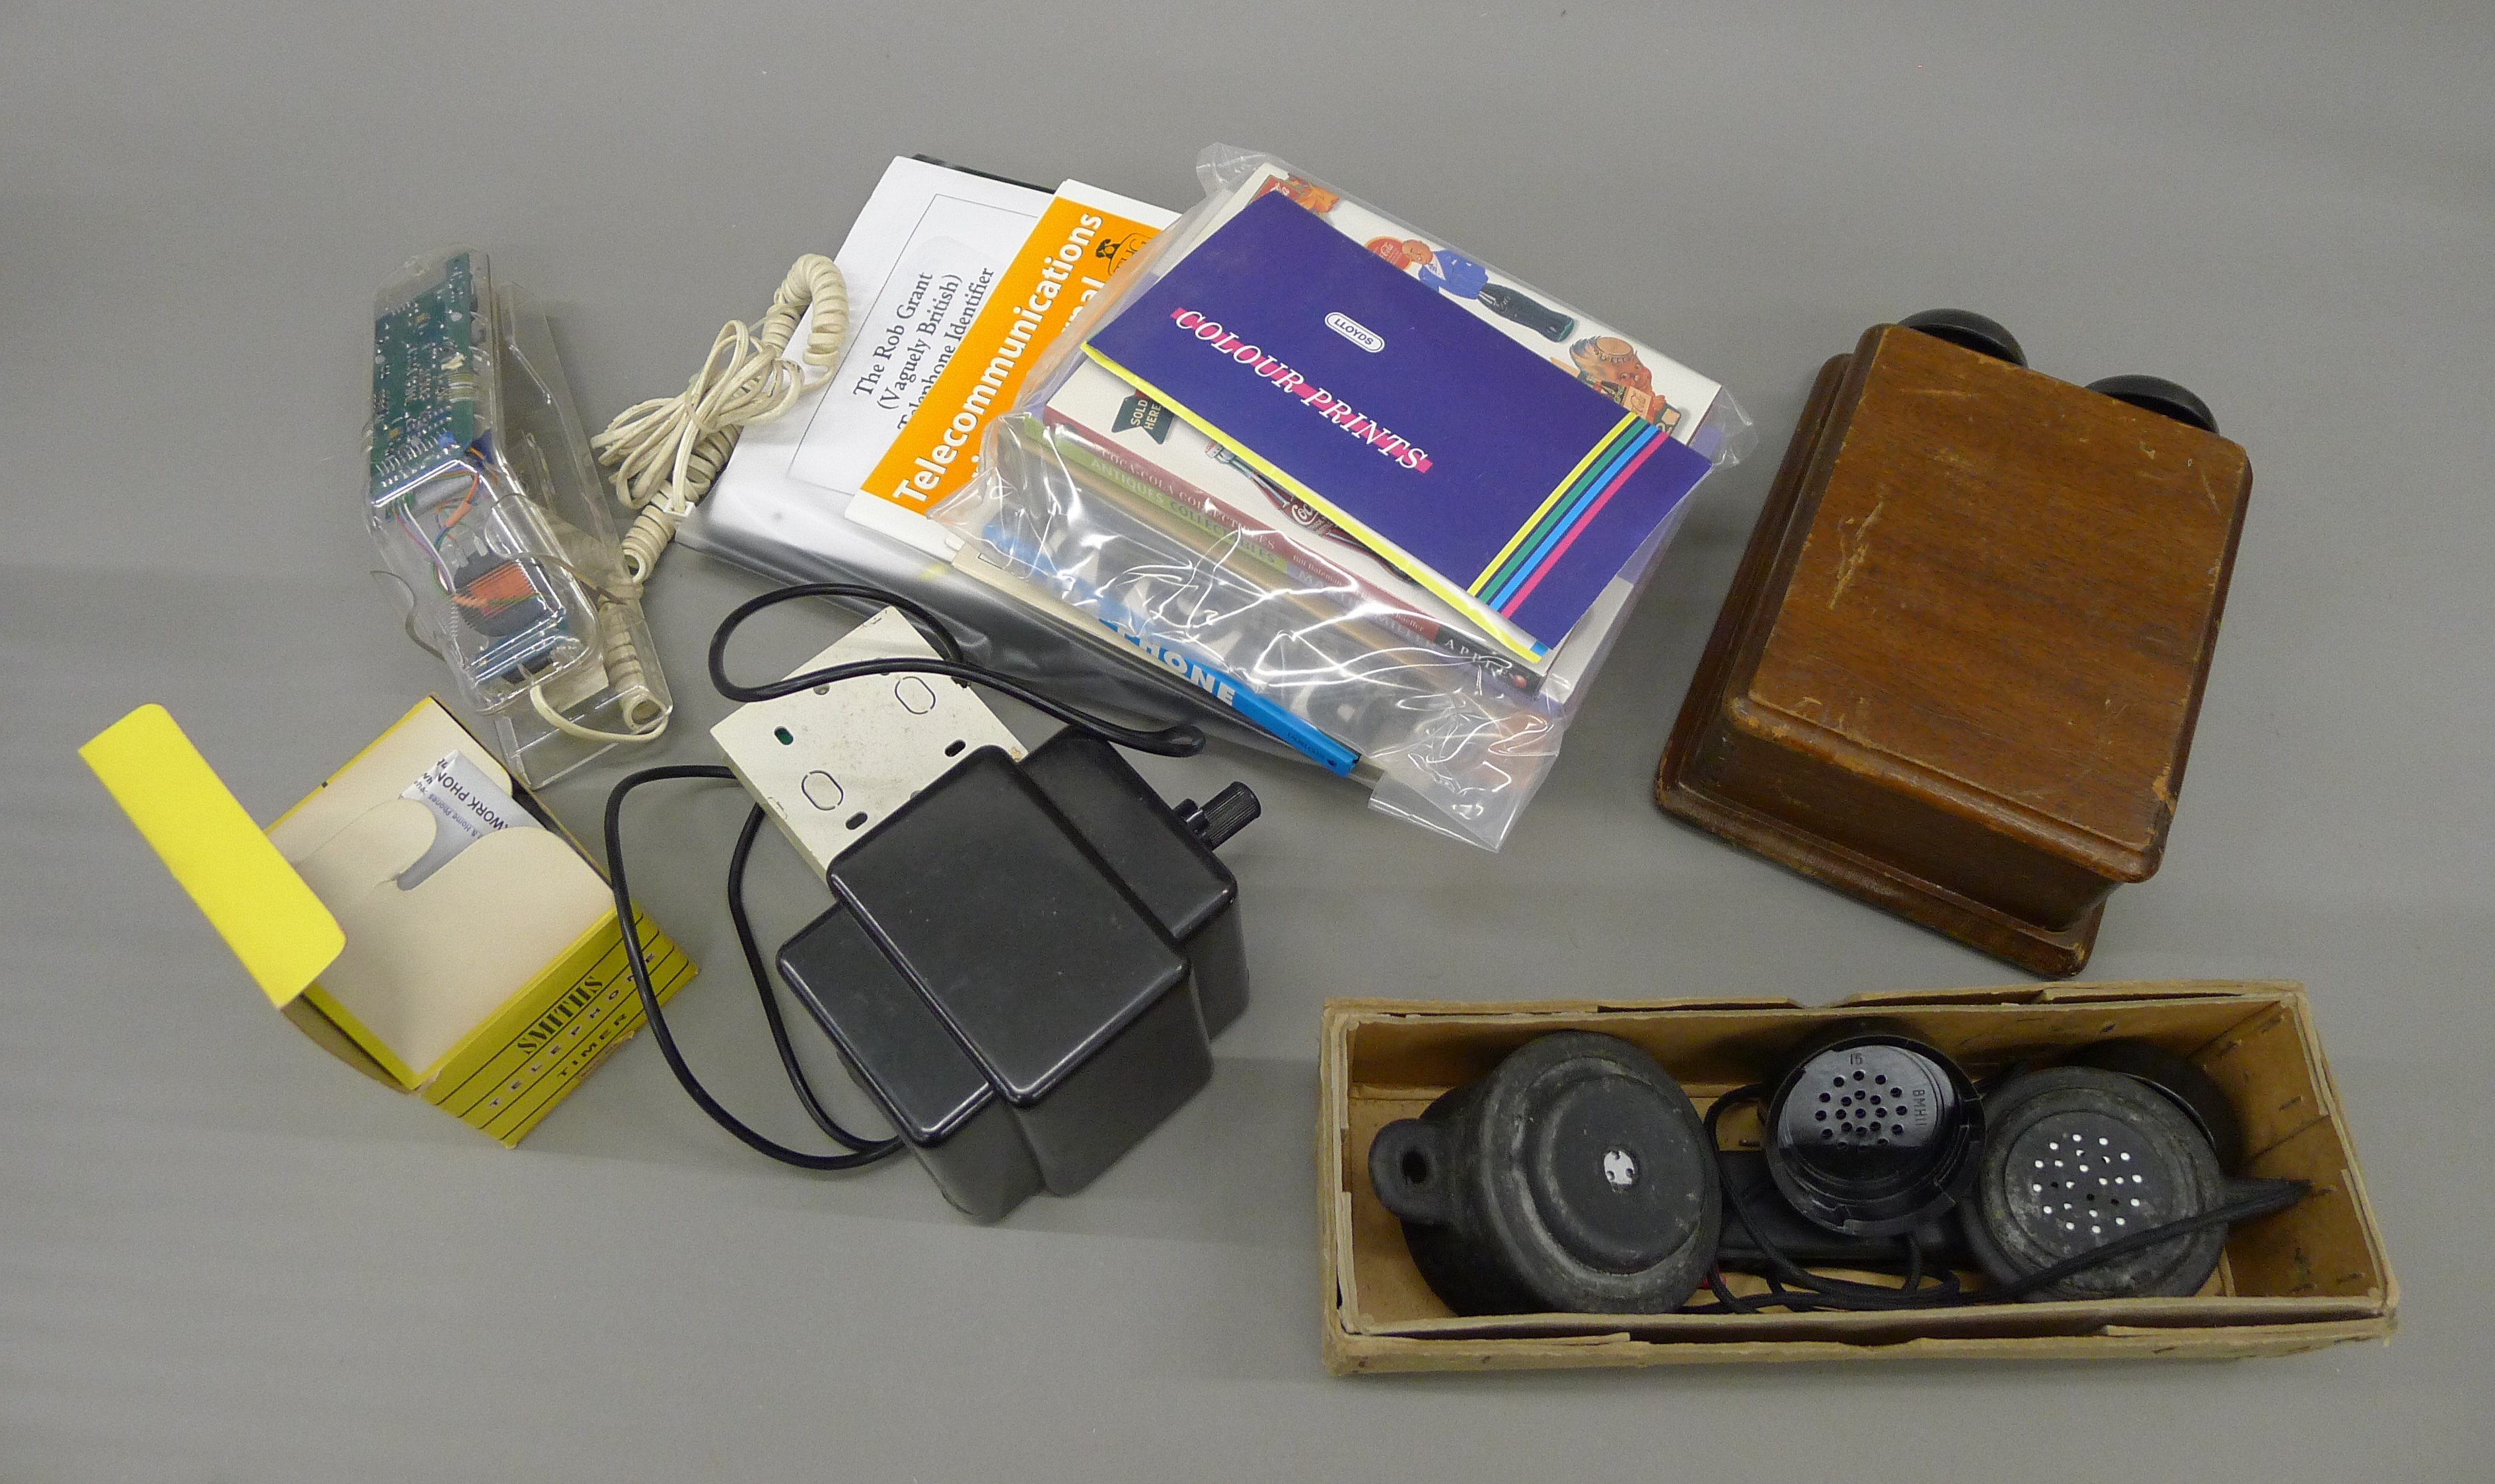 A box of various novelty telephones and telephone equipment.